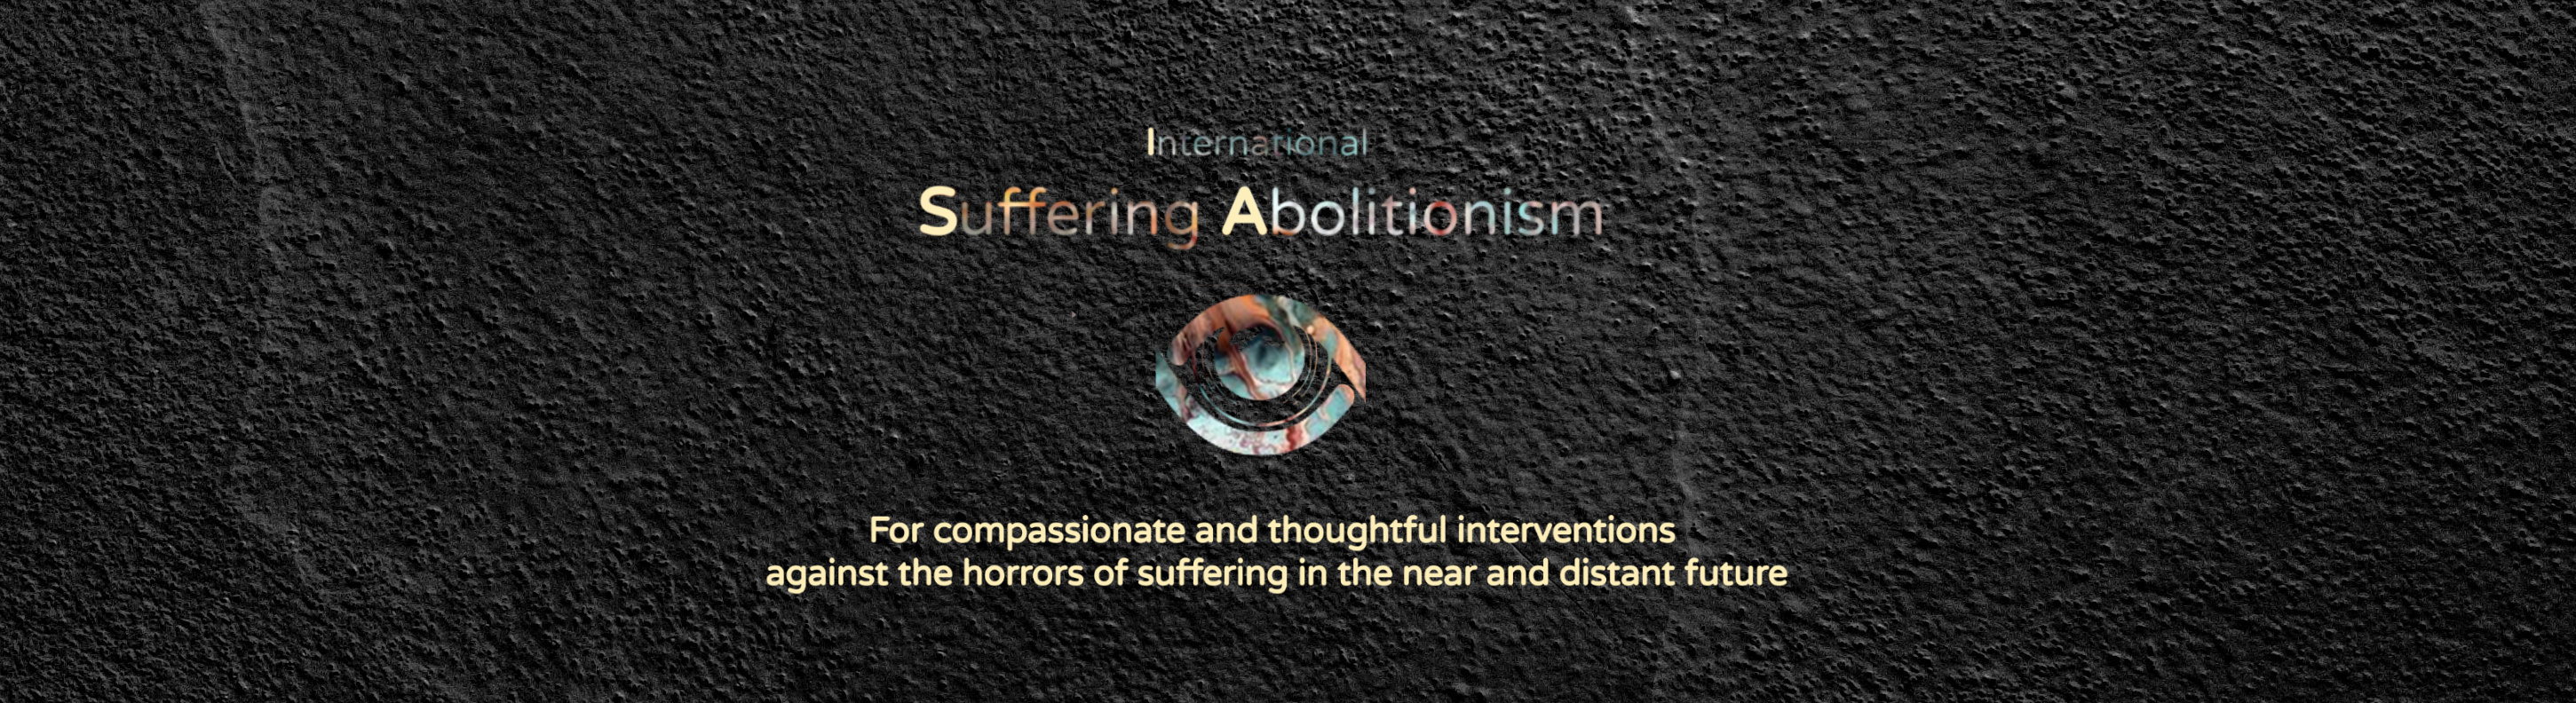 Suffering Abolitionism: for compassionate and thoughtful interventions against the horrors of suffering in the near and distant future